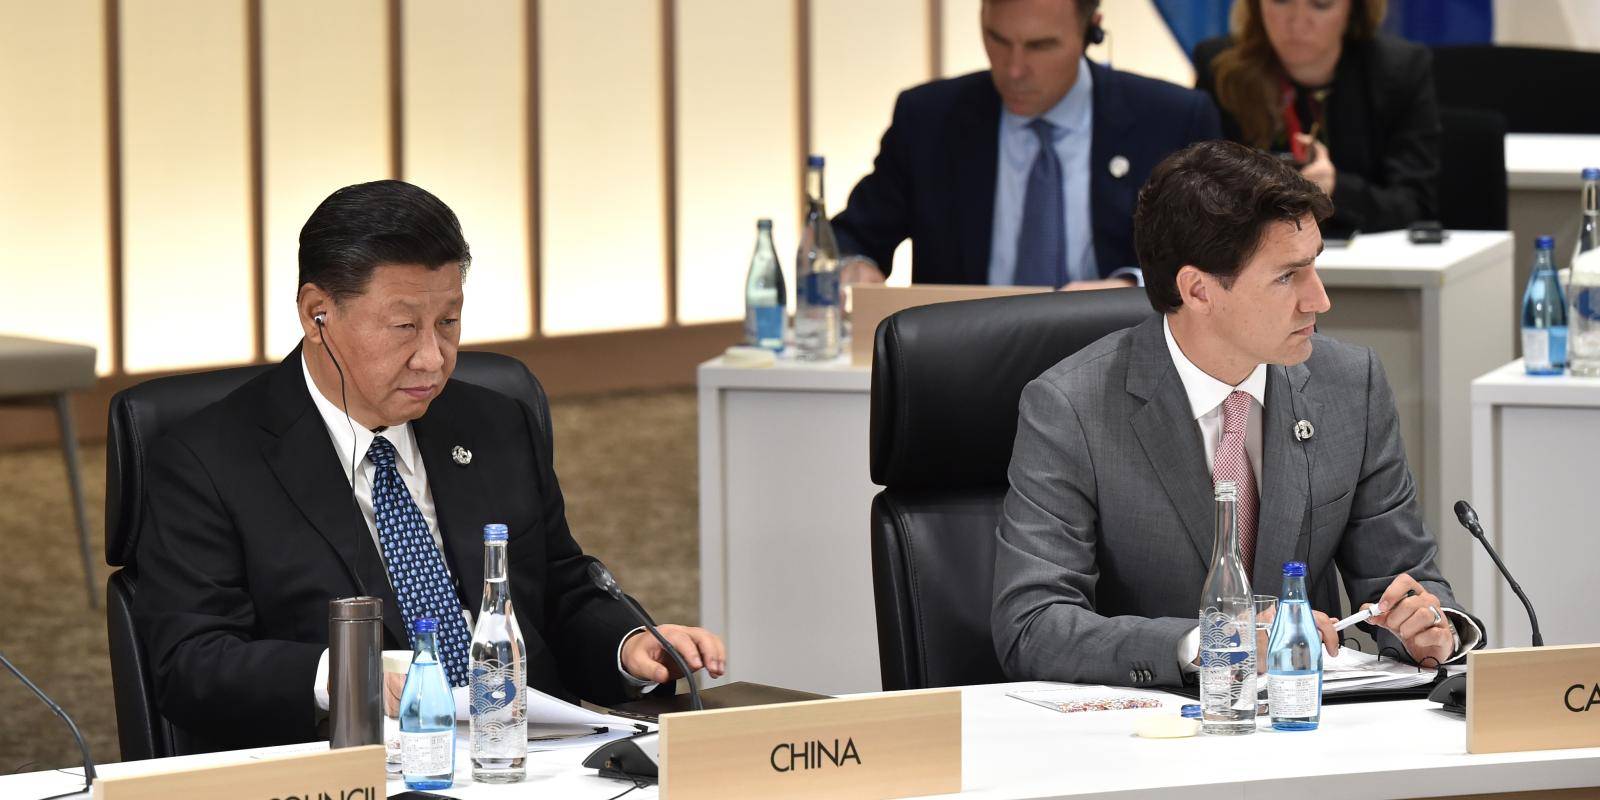 China’s President Xi Jinping and Canada’s Prime Minister Justin Trudeau attend
a session on women’s workforce participation, future of work and aging societies at the
G20 Summit on 29 June 2019 in Osaka, Japan.
Photo credit: Copyright © Kazuhiro NOGI/Pool/Getty